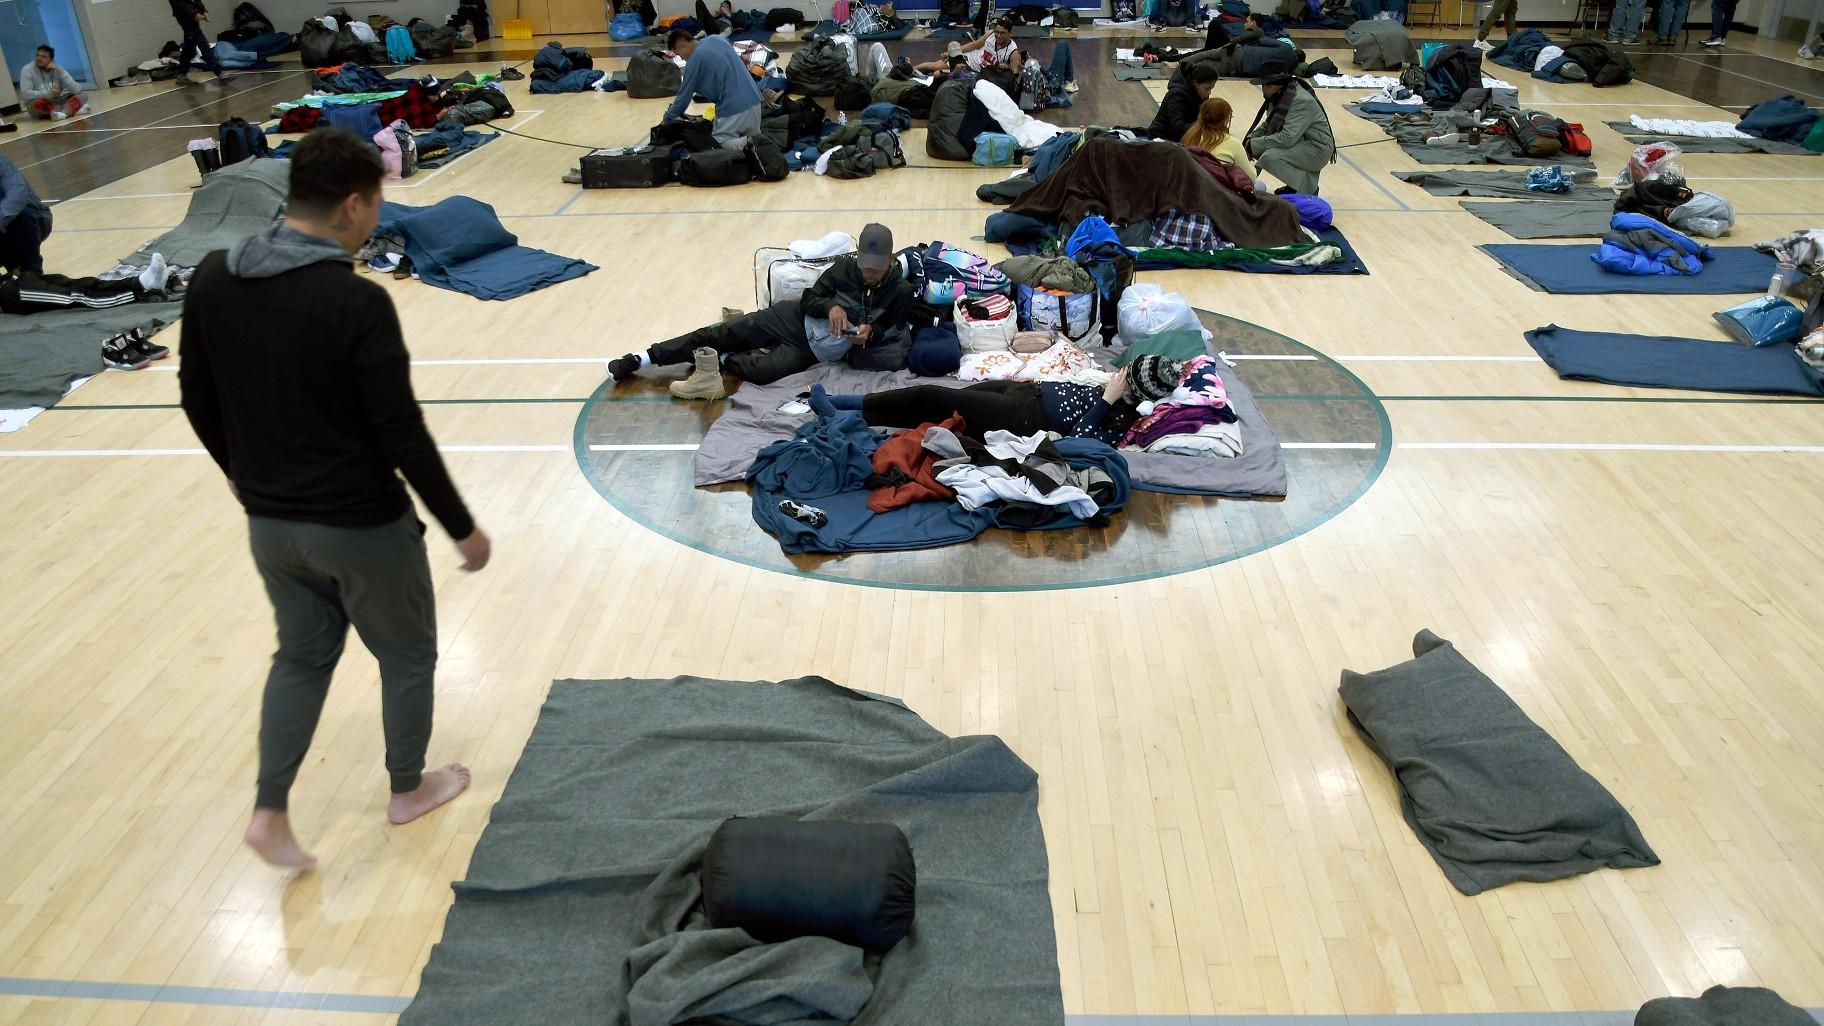 Migrants rest at a makeshift shelter in Denver, Jan. 6, 2023. Five mayors from around the U.S. want a meeting with President Joe Biden to ask for help controlling the continued arrival of large groups of migrants to their cities. (AP Photo / Thomas Peipert)